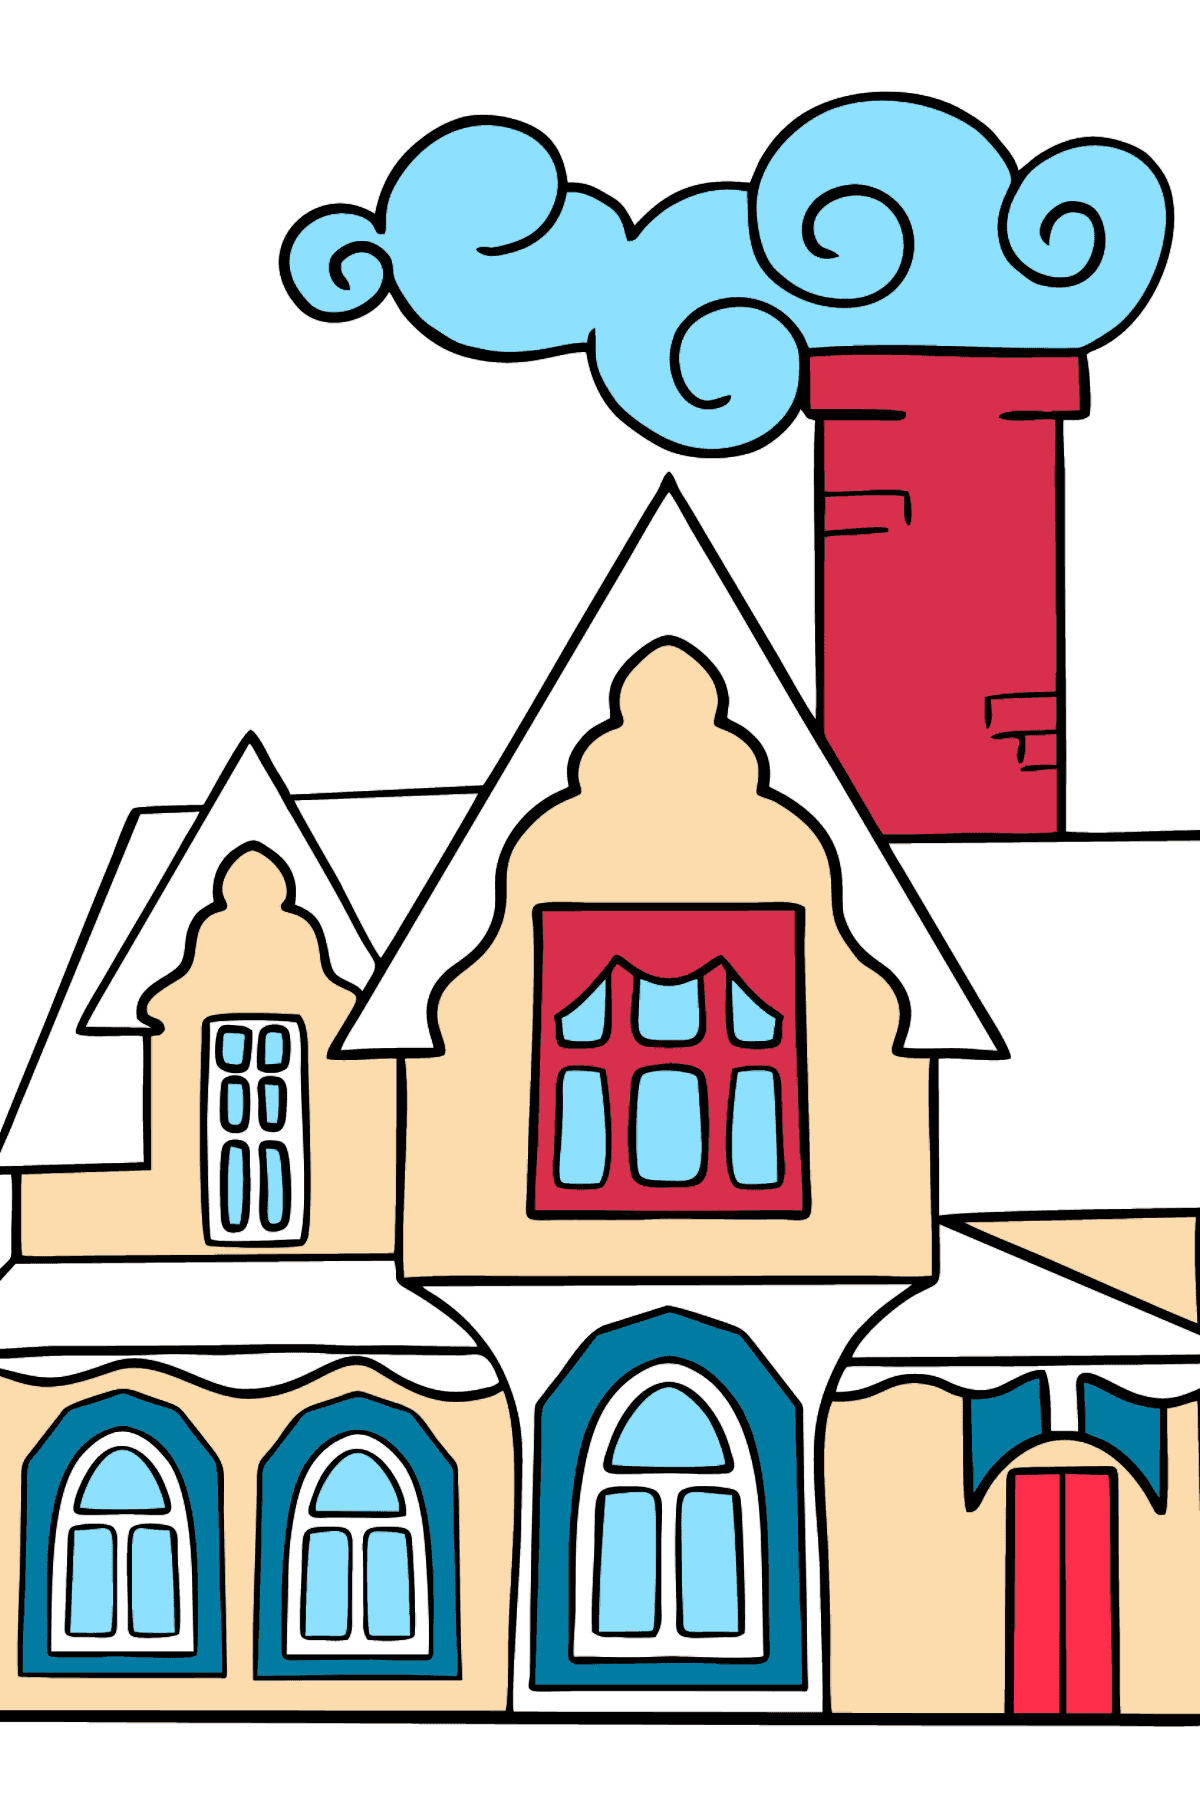 Coloring Page - A Miraculous House - Coloring Pages for Kids